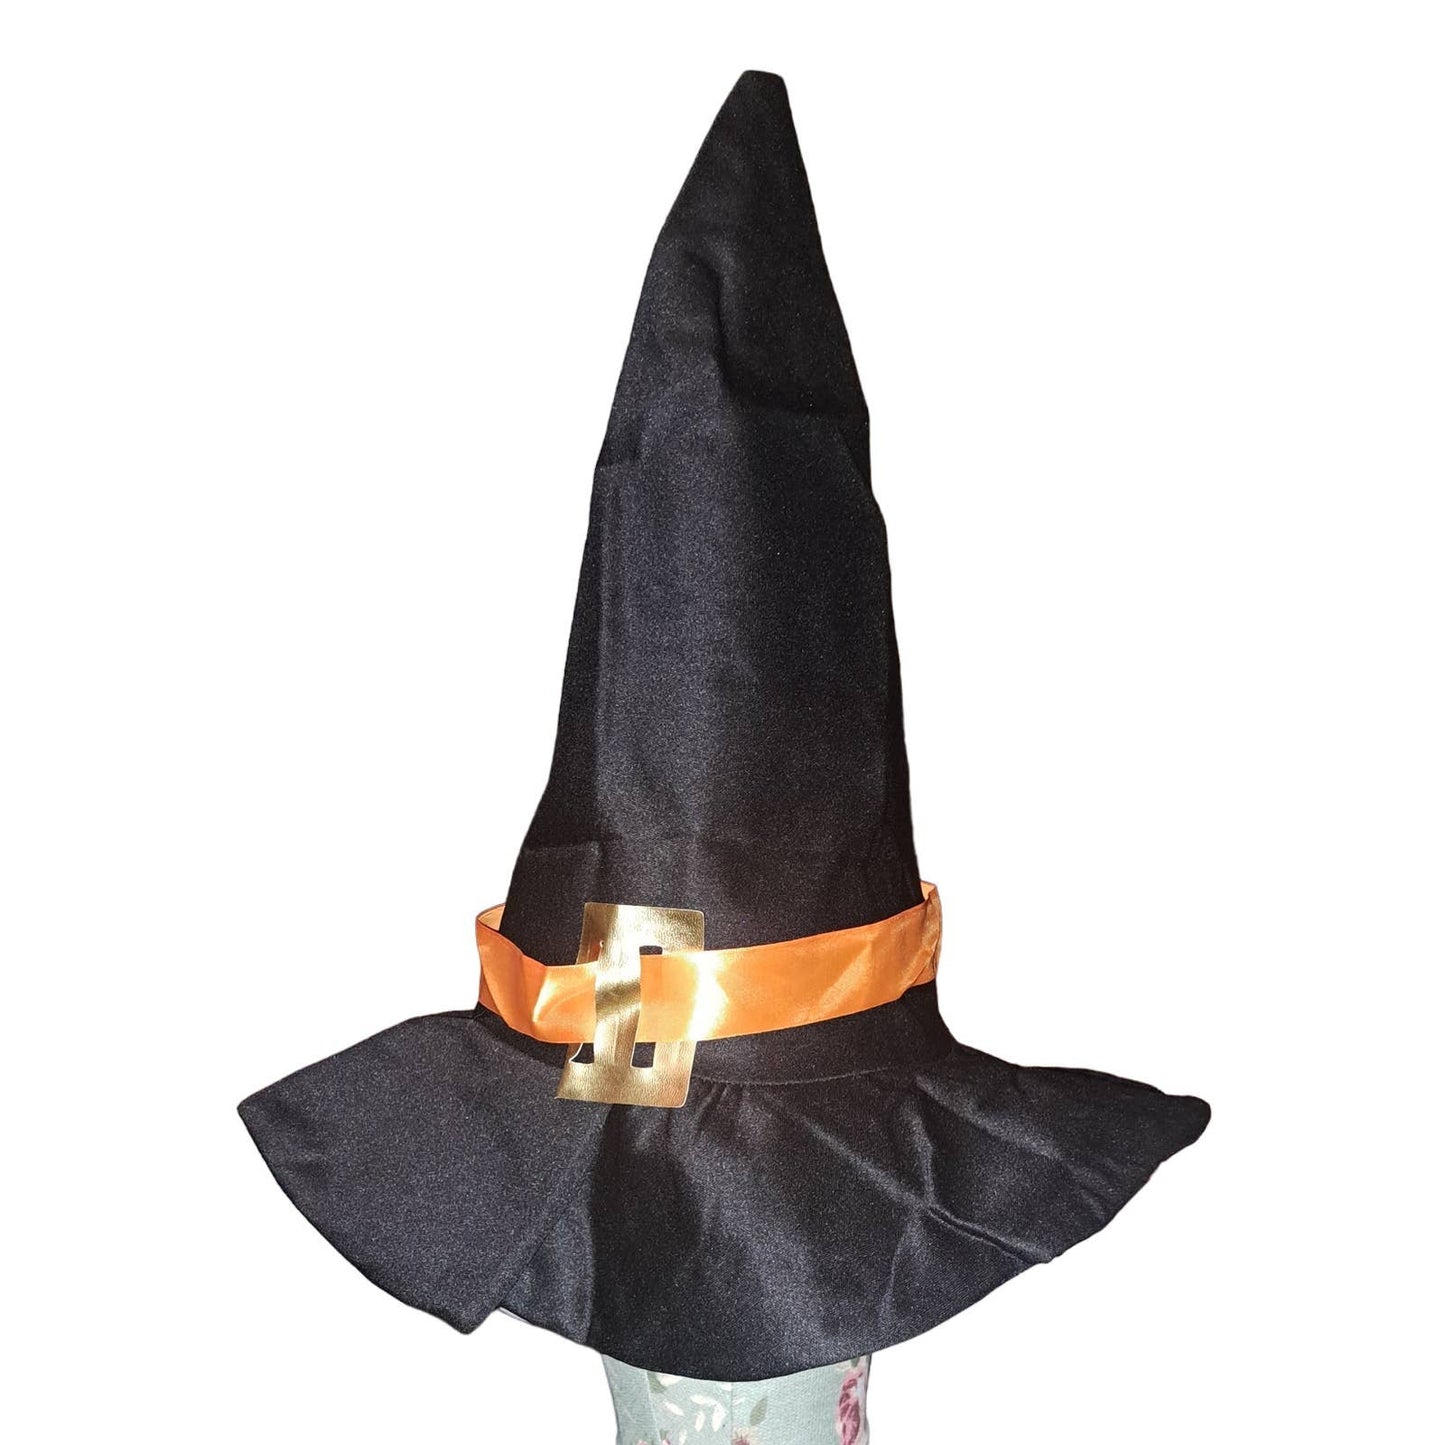 Halloween SALE! Well Made REUSE for years Adult size Witch hat & Cape